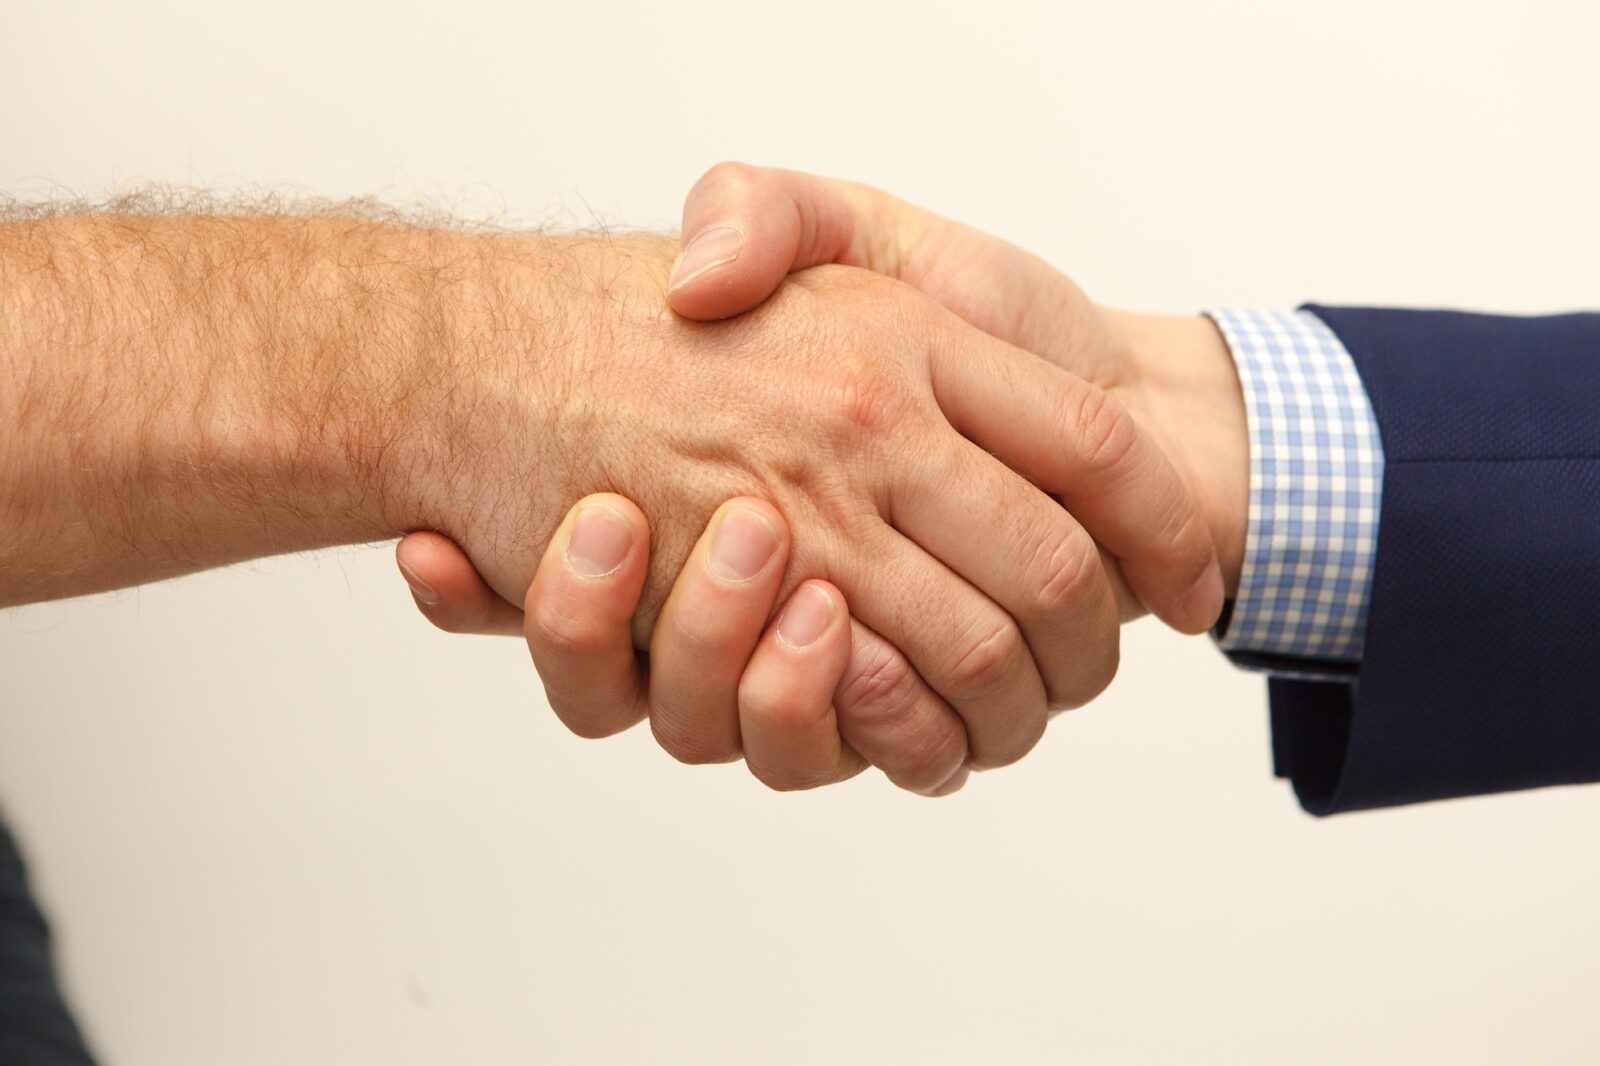 Two people making a business deal by shaking hands